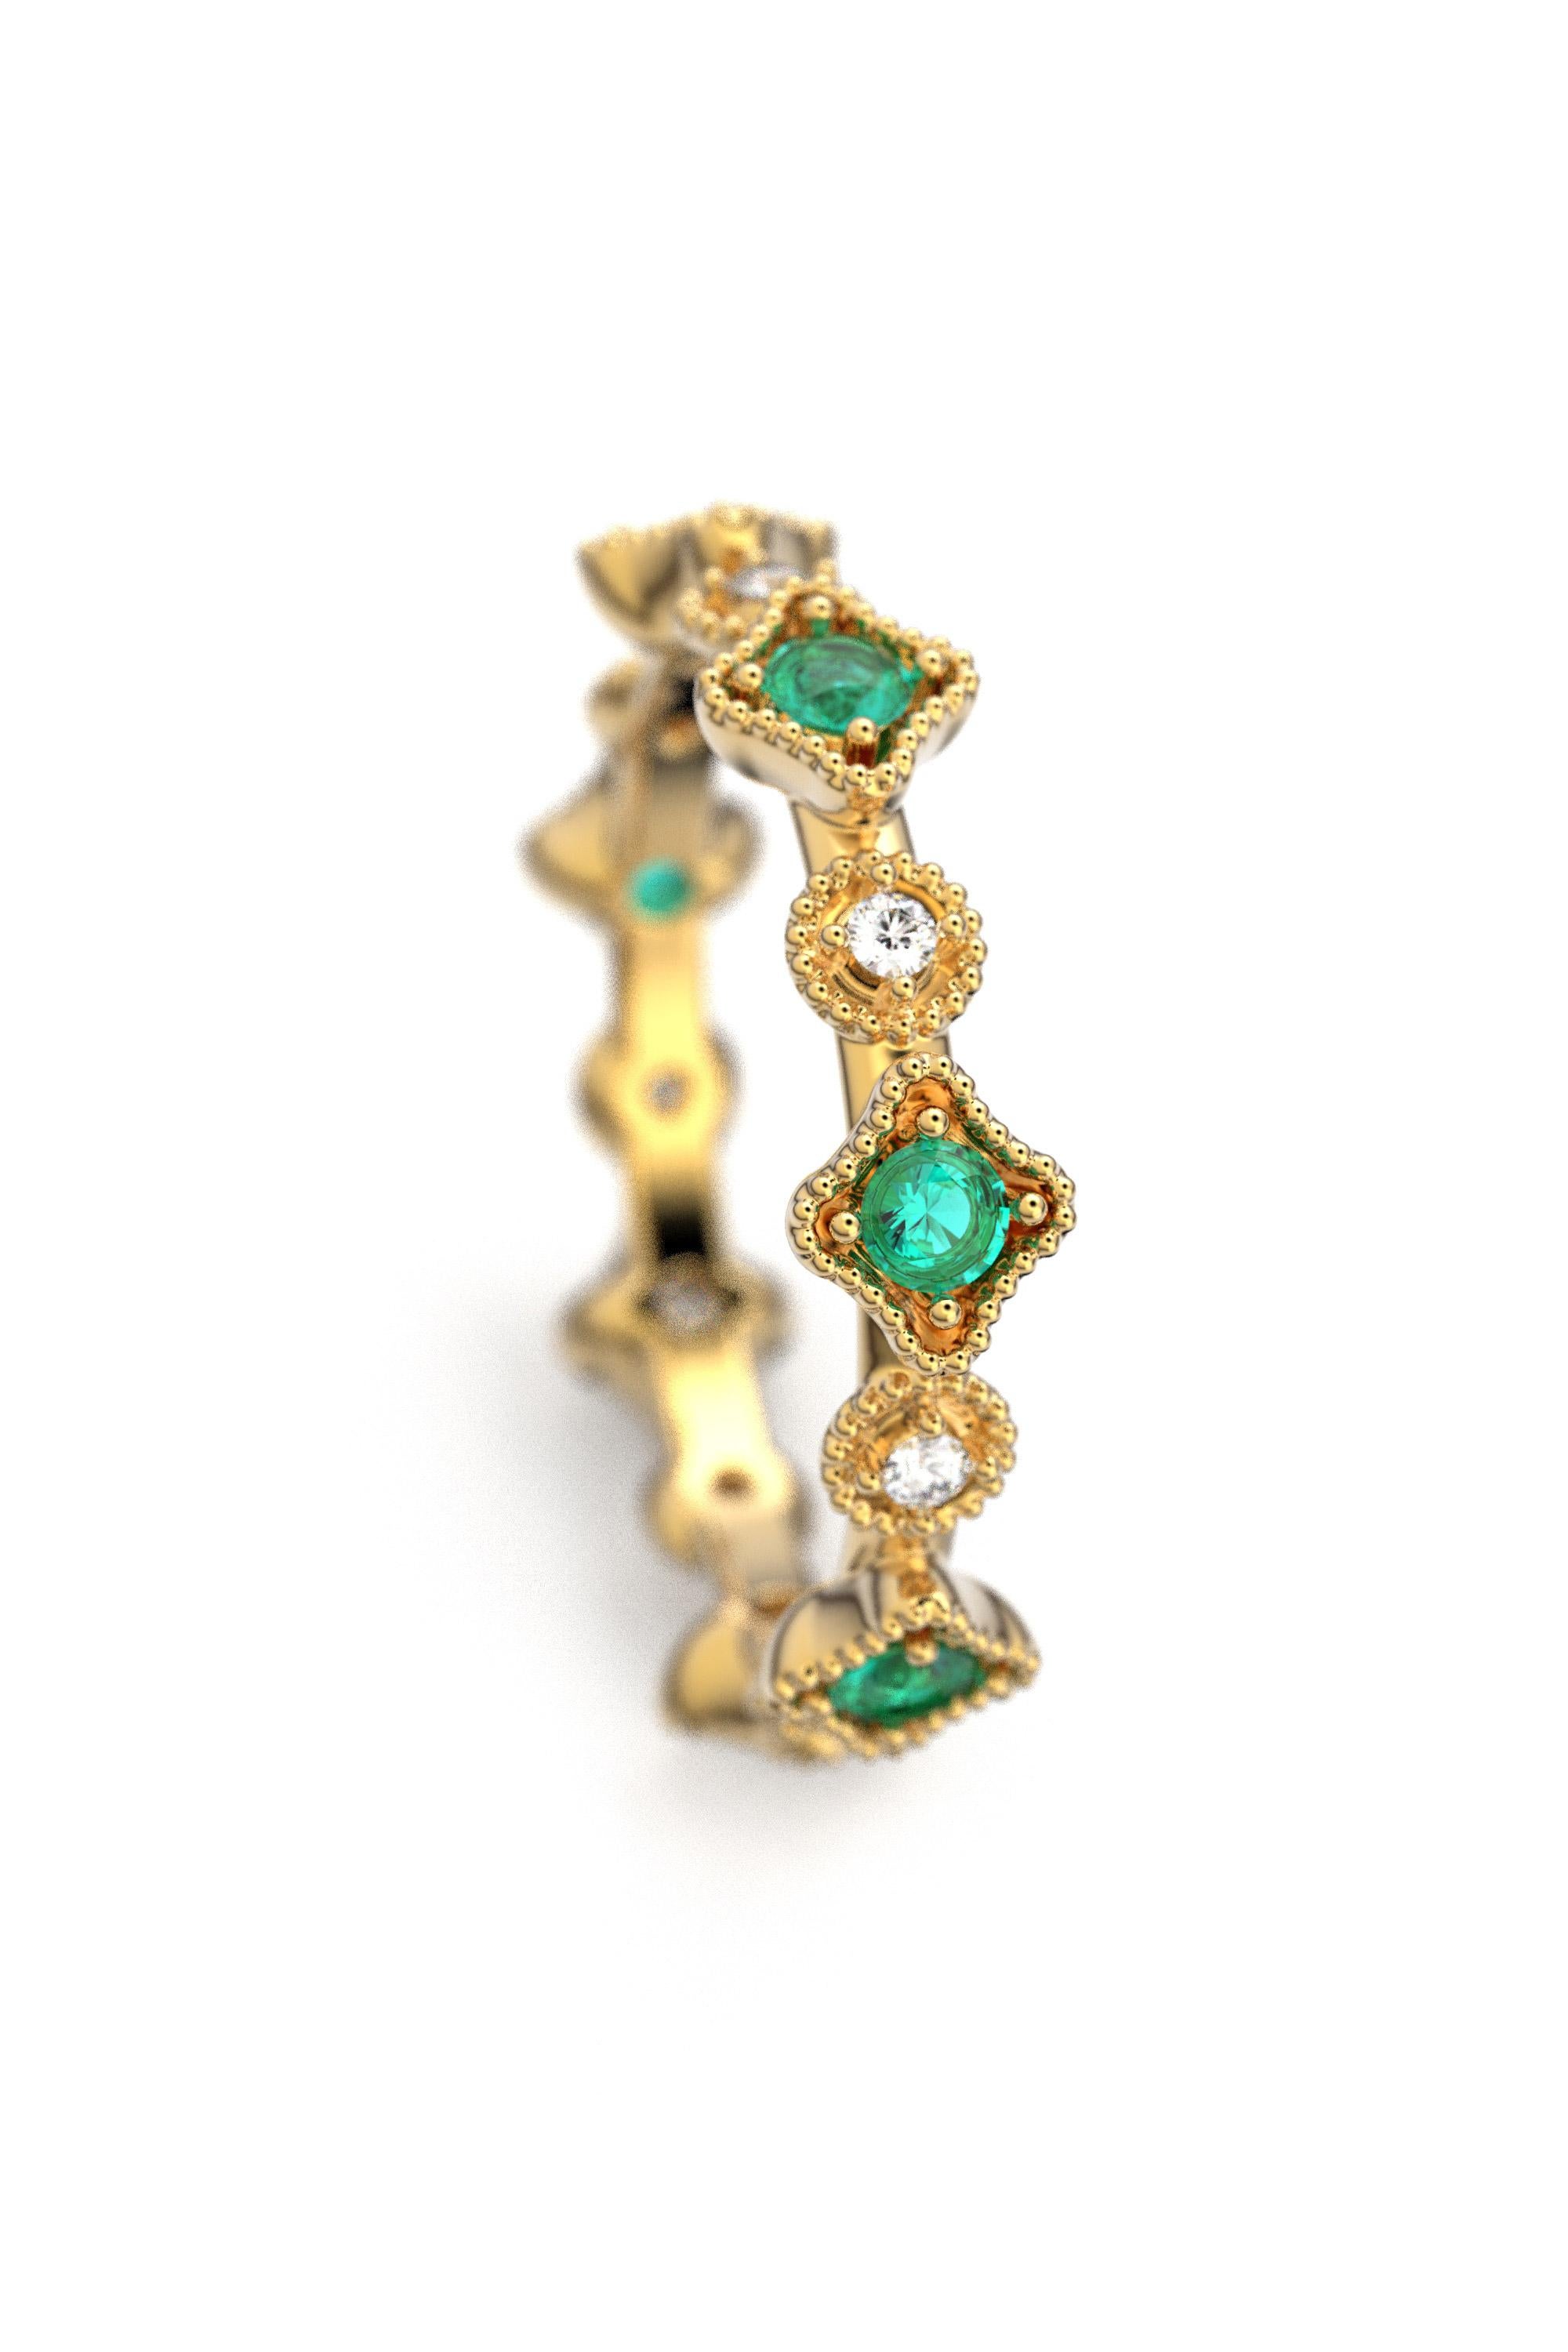 For Sale:  18k Gold Eternity Band with Natural Emerald and Diamonds, Made in Italy Jewelry 10